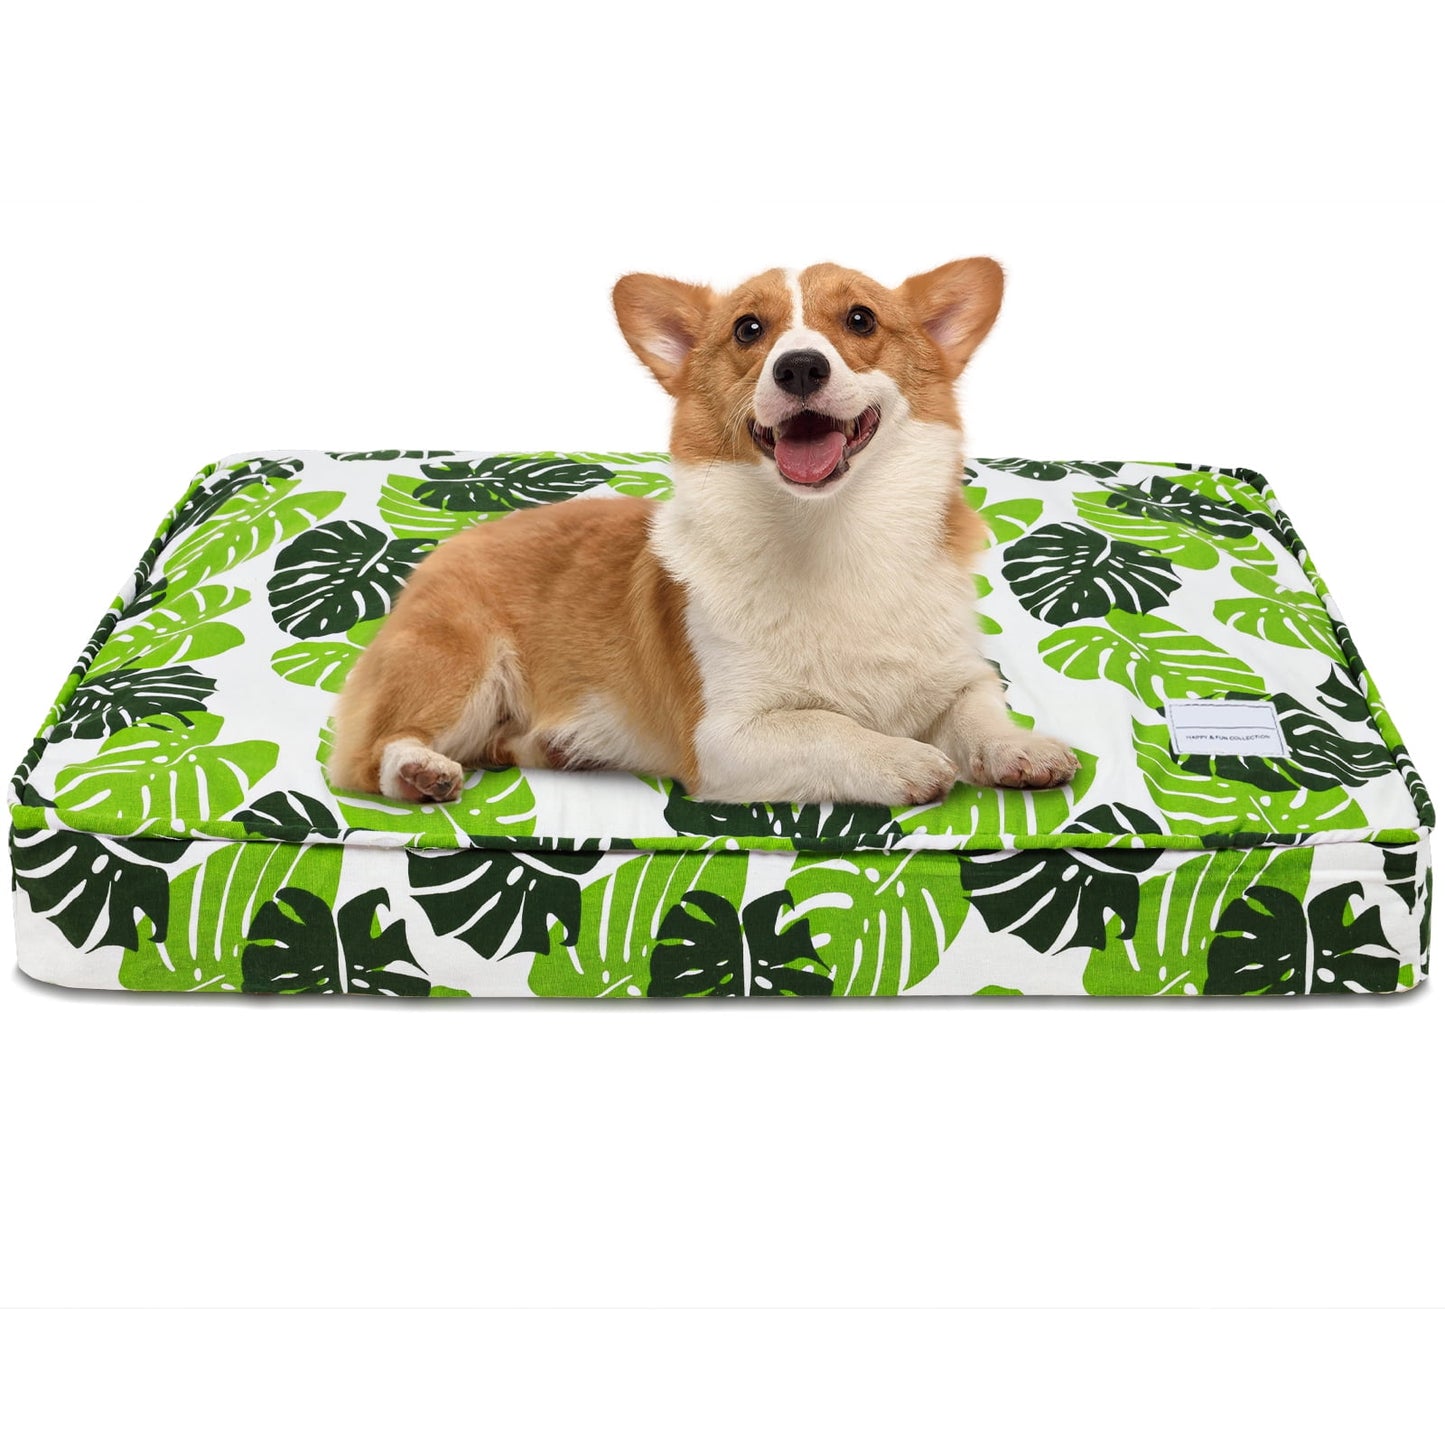 Exclusivo Mezcla Orthopedic Dog Bed for Small Dogs, Shredded Memory Foam Supportive Therapy Fillings Pet Bed, Soft Warm Washable Cat Cuddler Bed, Monstera Leaf 24''x18''